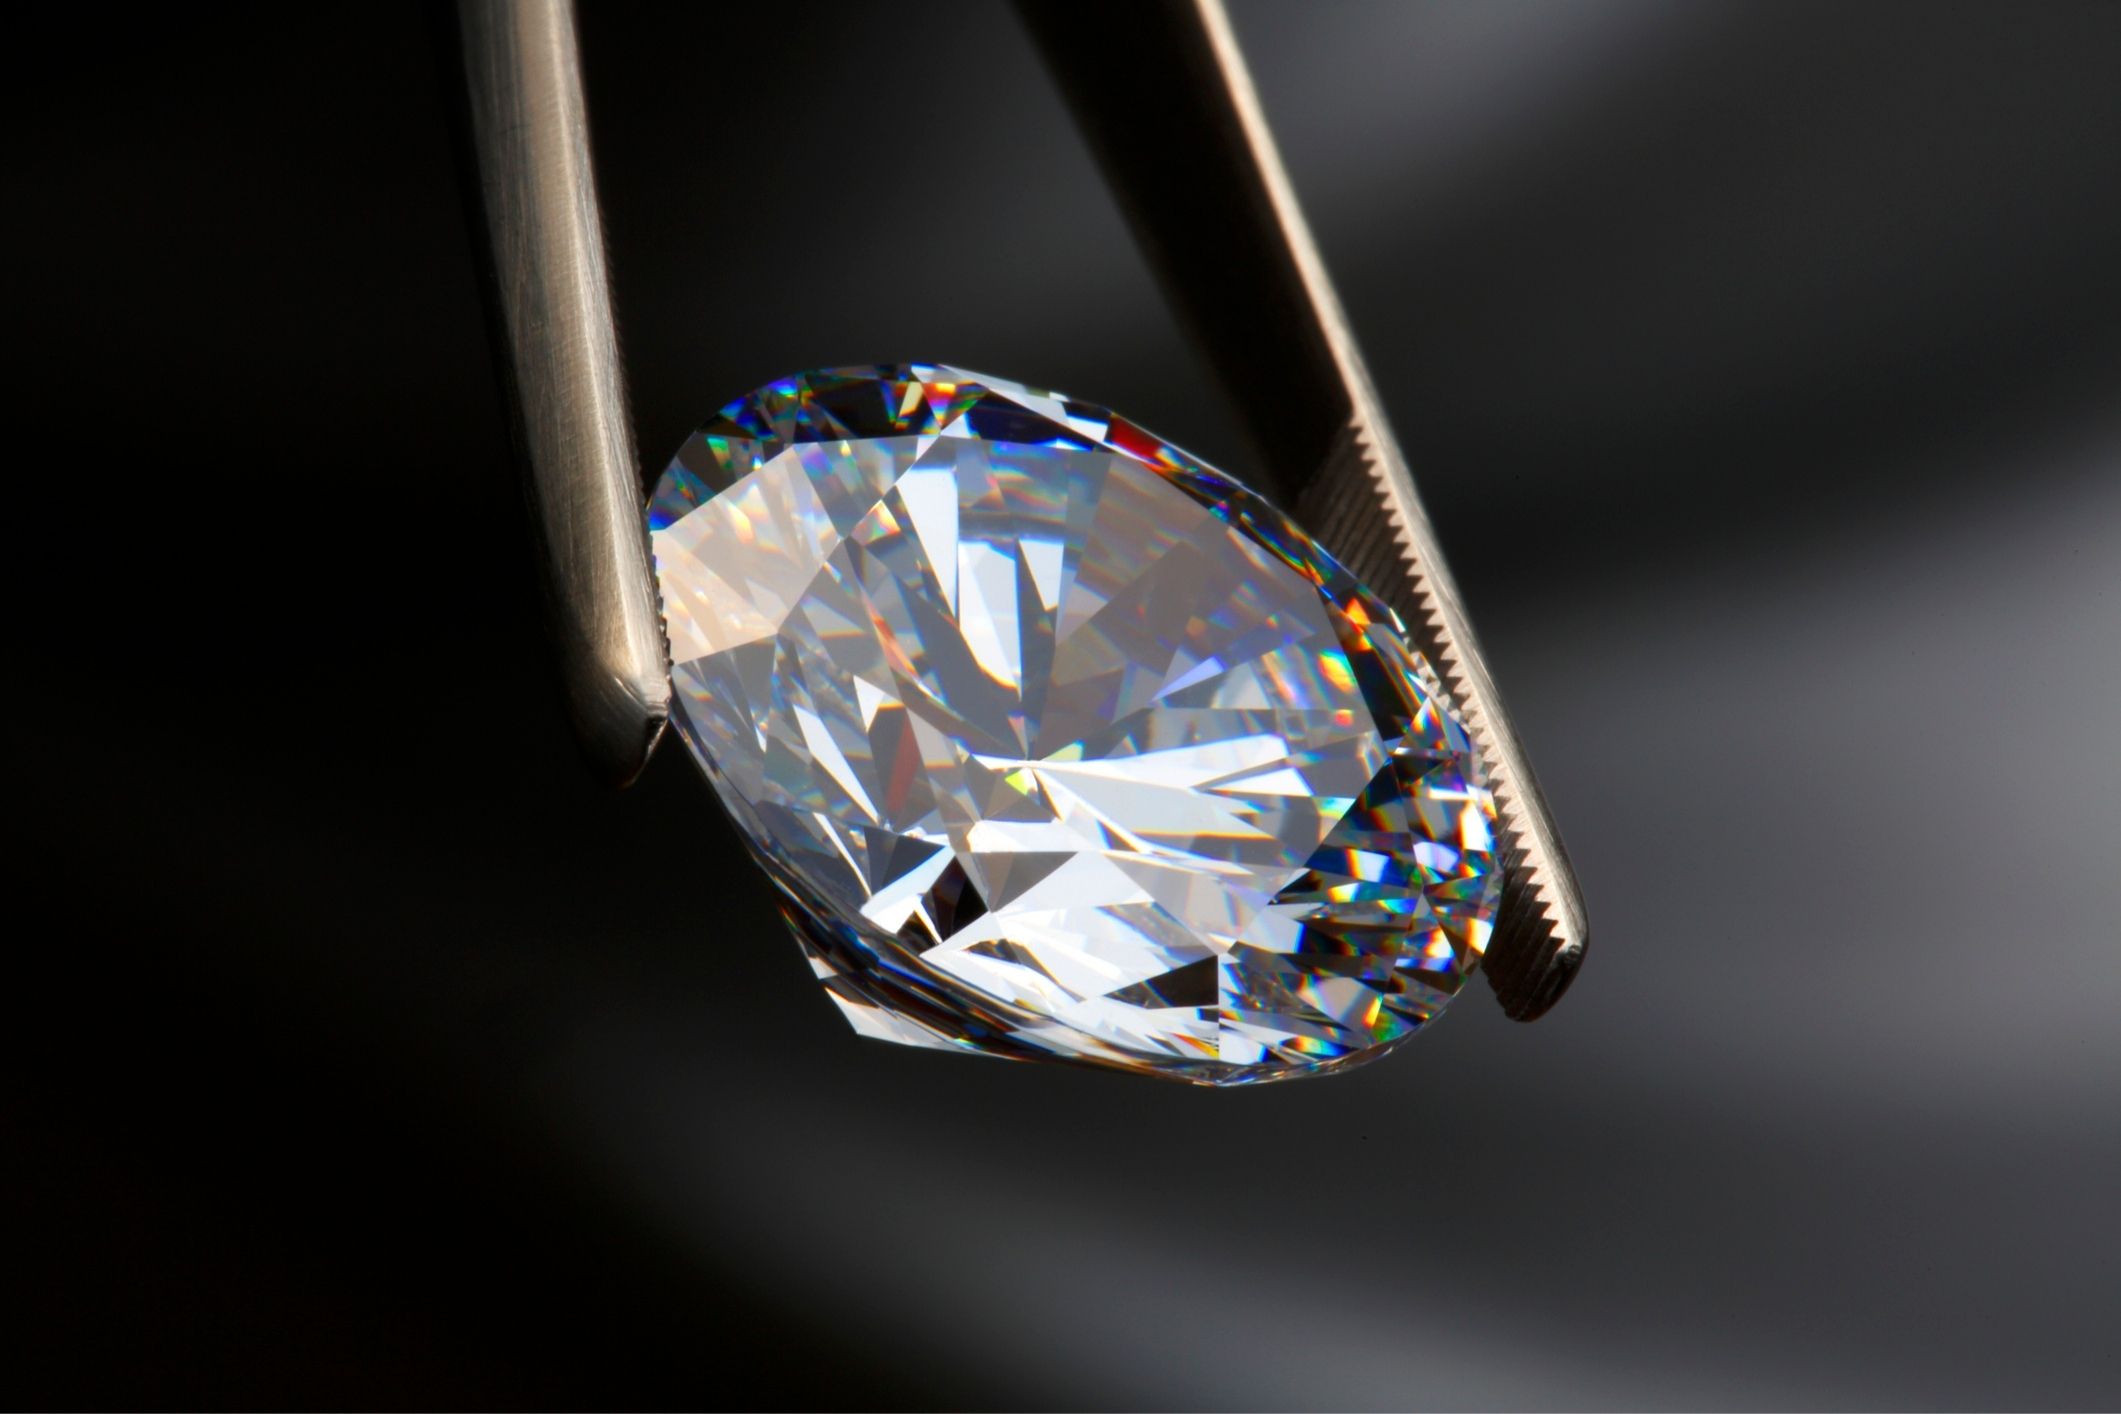 Pensioner discovers ‘fake diamond’ she bought at car boot sale is worth $3.6 million dollars